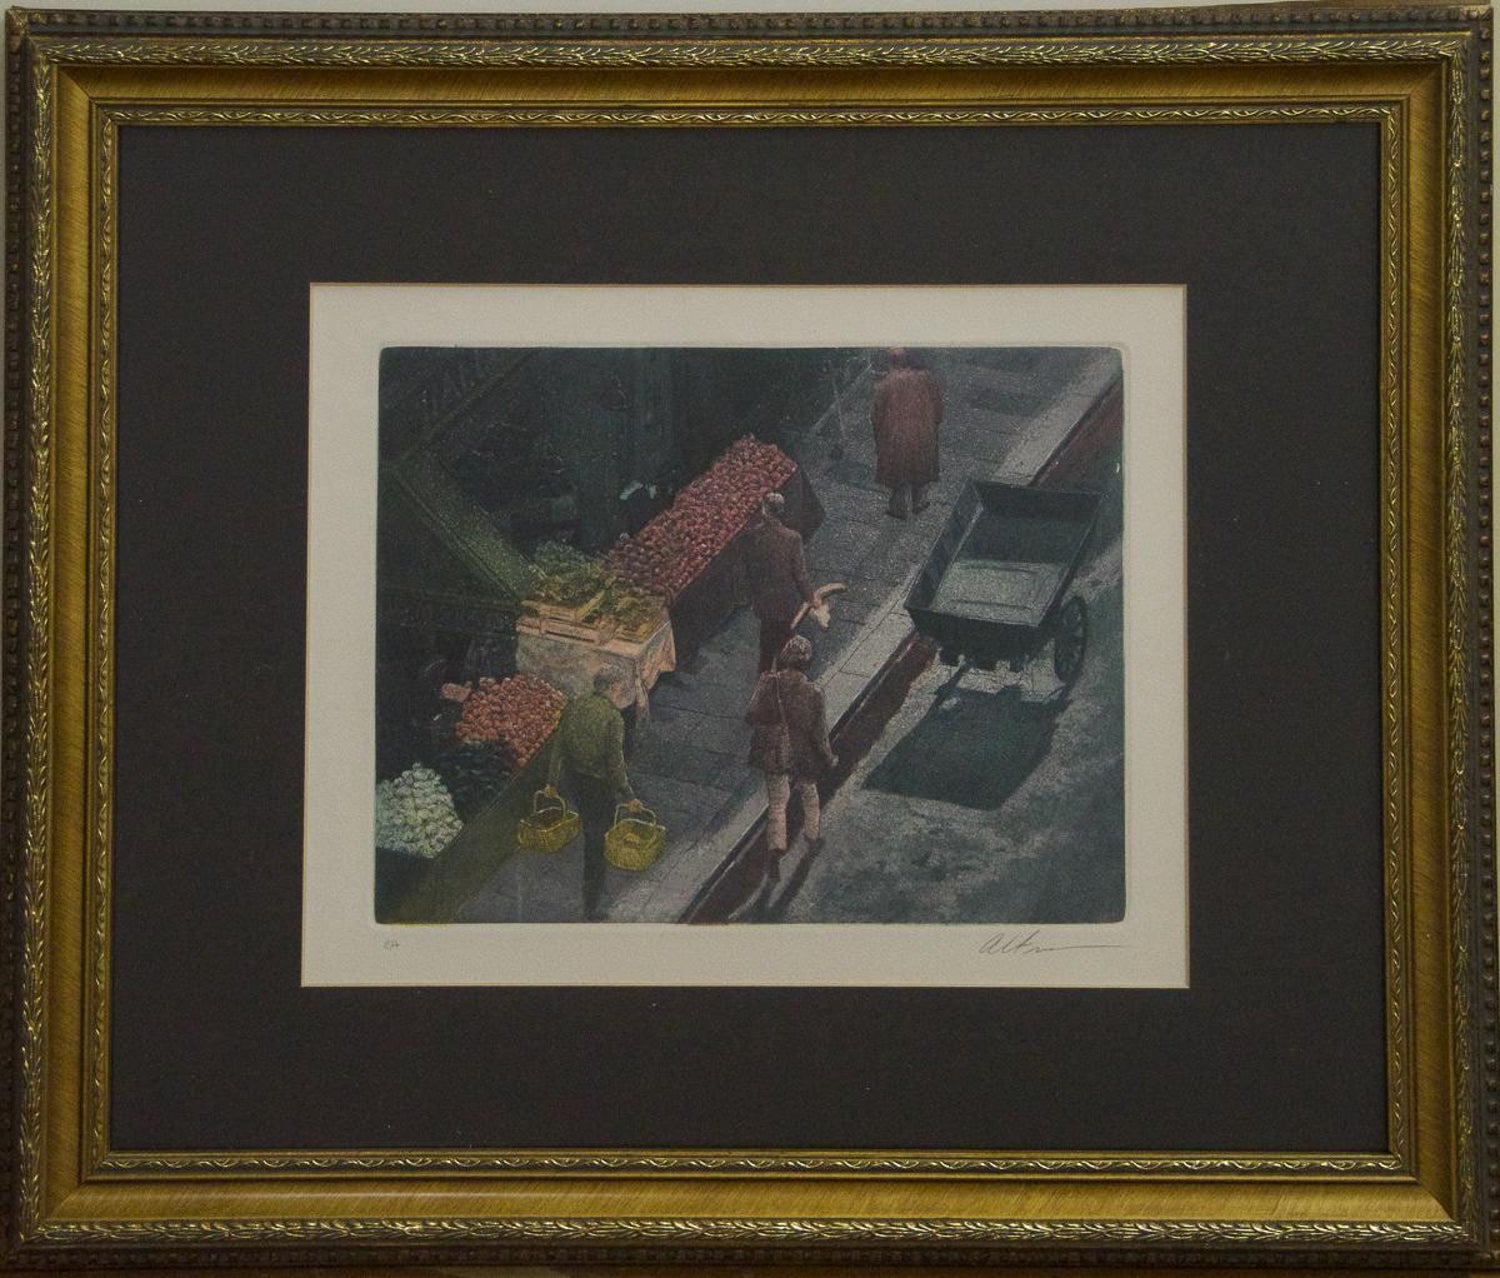 Harold Altman - Framed Limited Edition Lithograph. "Fish Market" by Altman,  Hand Signed. For Sale at 1stDibs